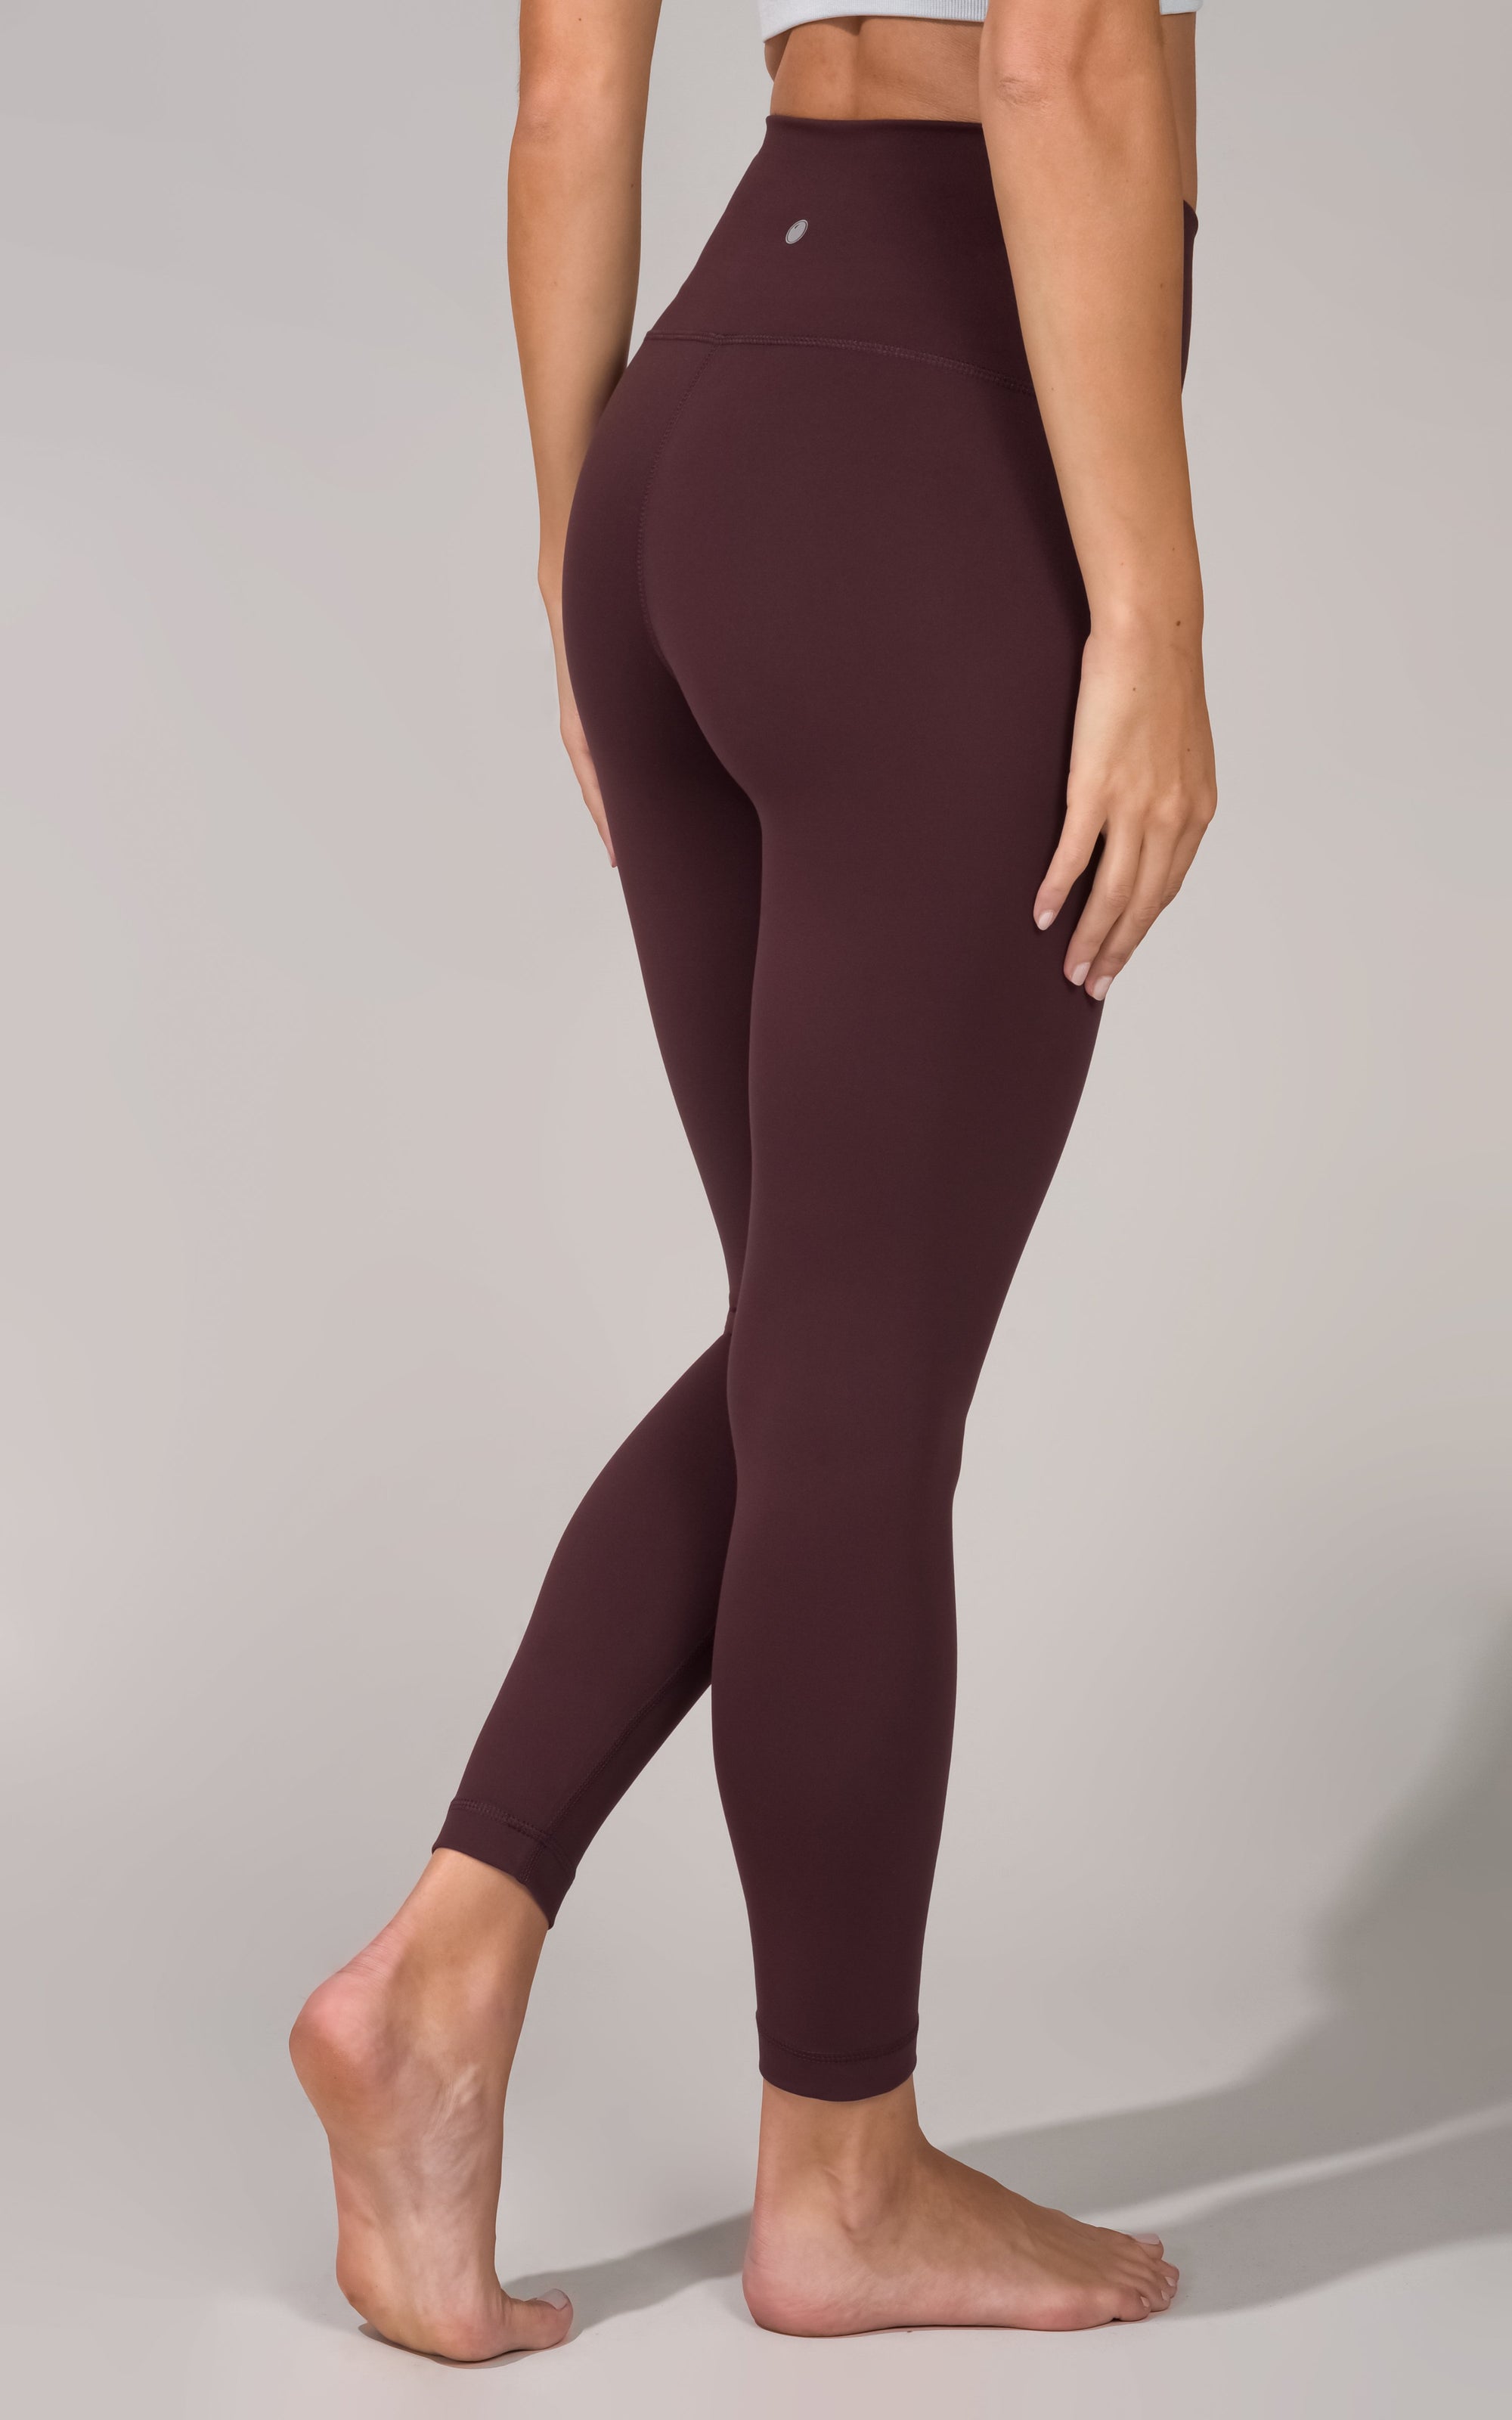 Yogalicious Lux Yoga Pants XS Pockets Athletic Leggings Burgundy Wide  Waistband - Pioneer Recycling Services